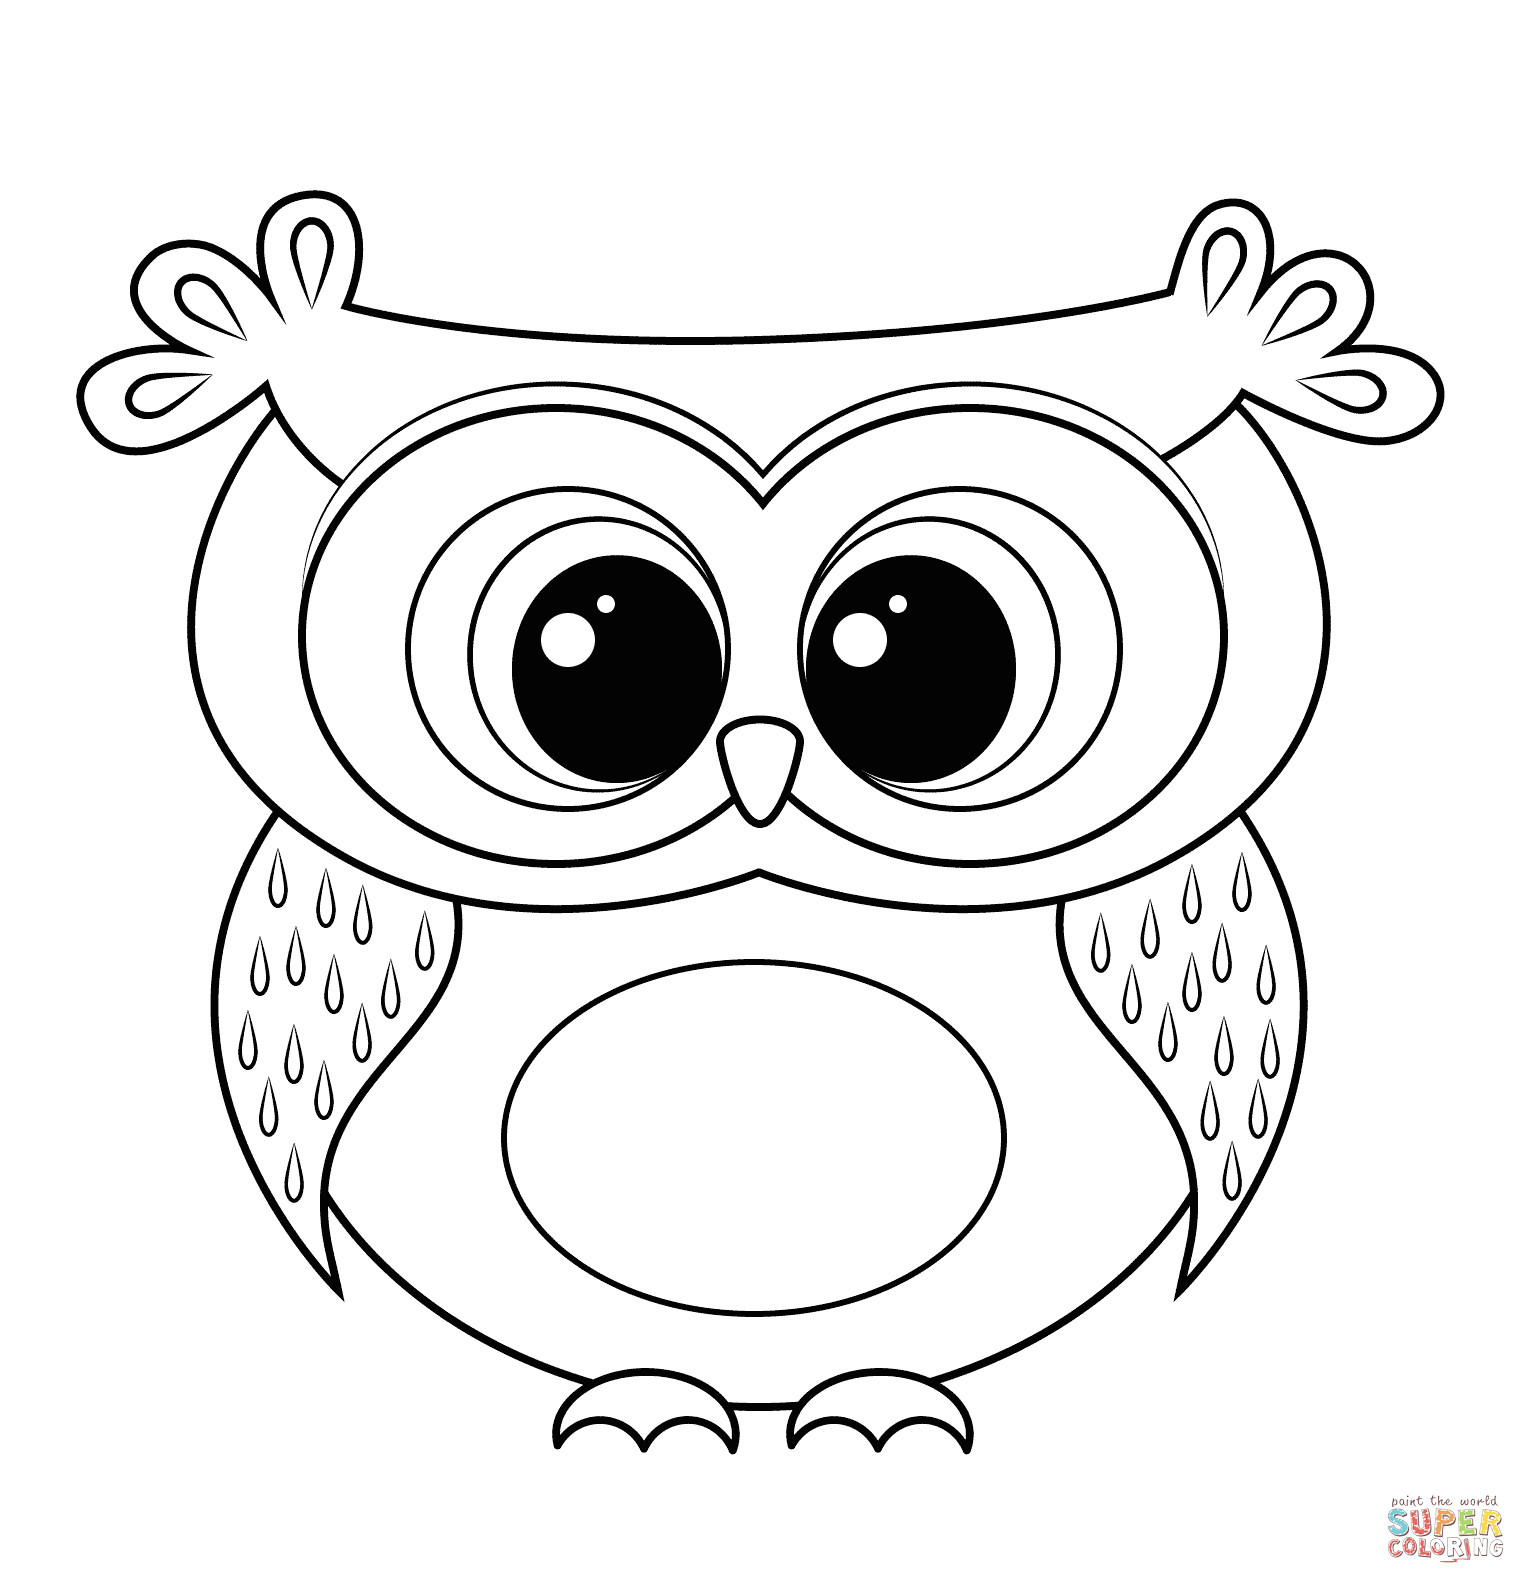 Drawing A Cartoon Owl Cartoon Owl Coloring Page Free Printable Coloring Pages Designs